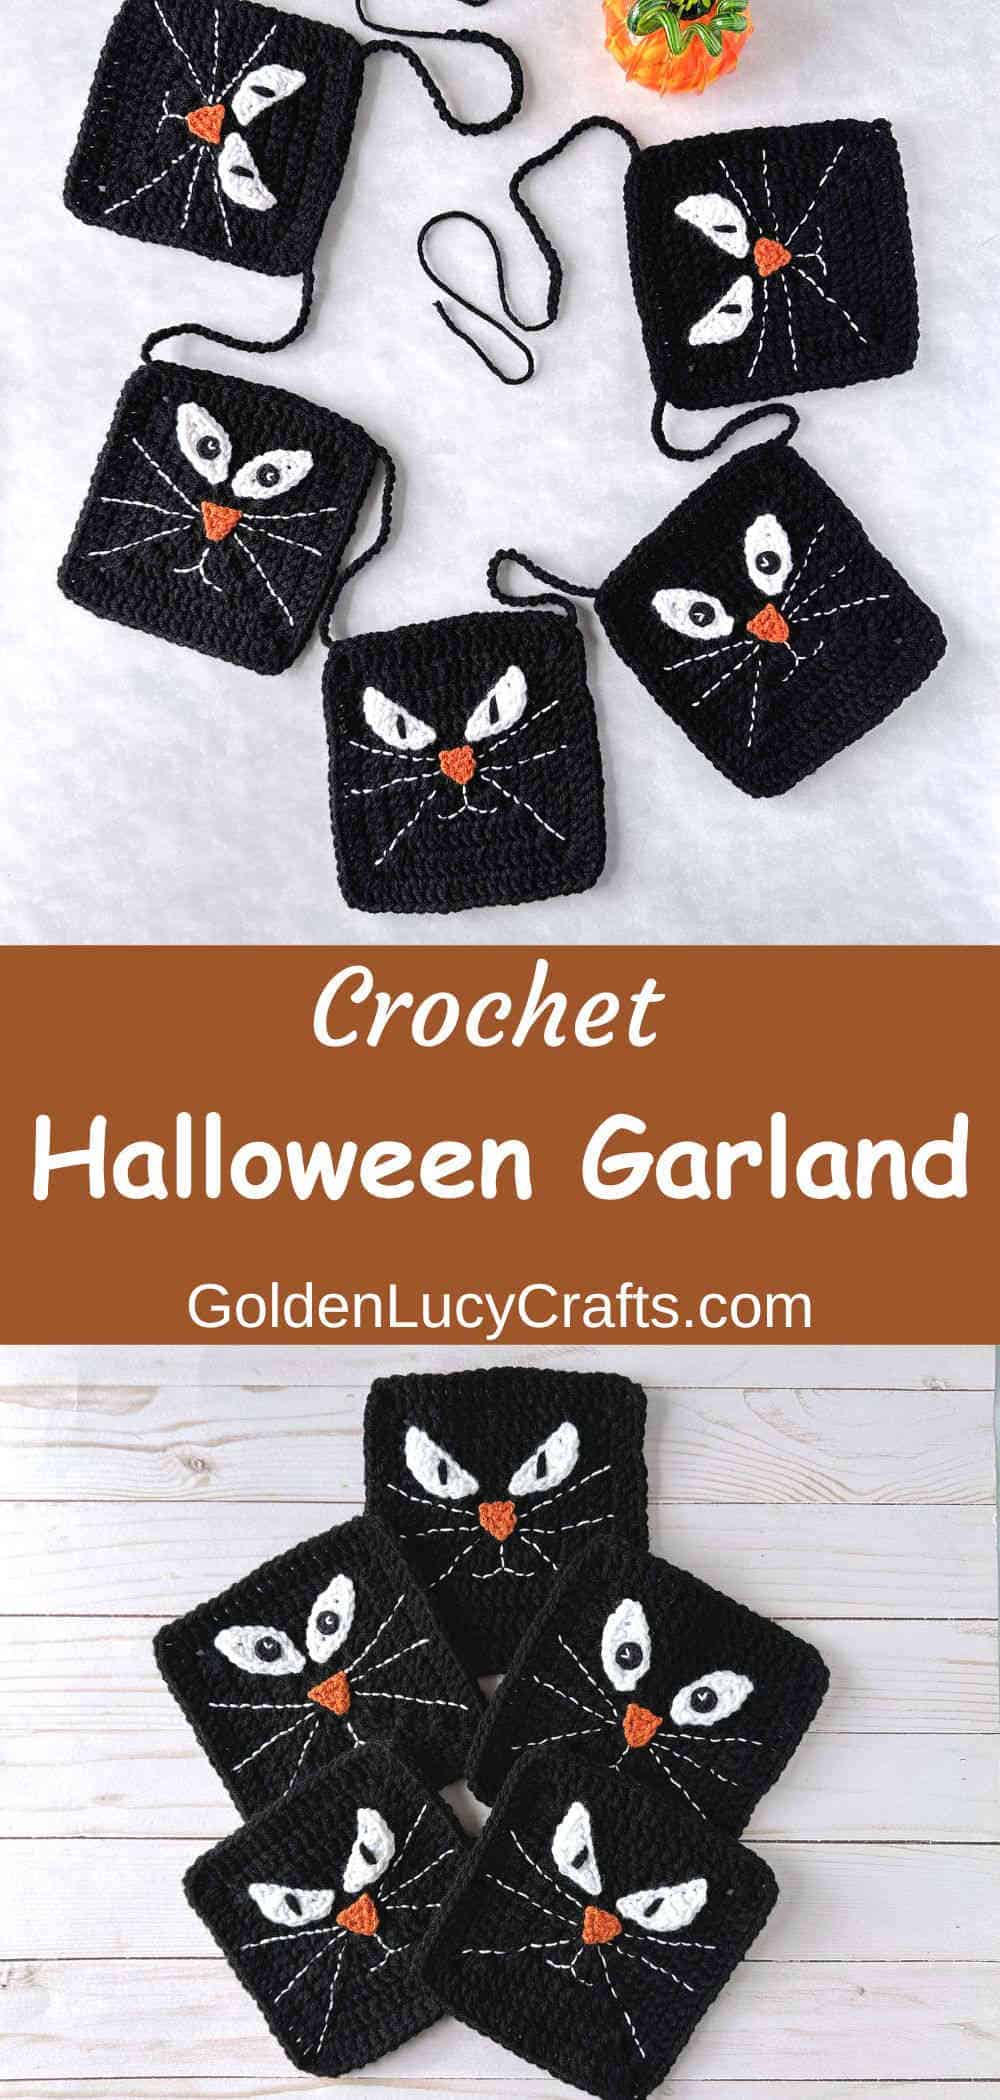 Crocheted black cat squares garland for Halloween.